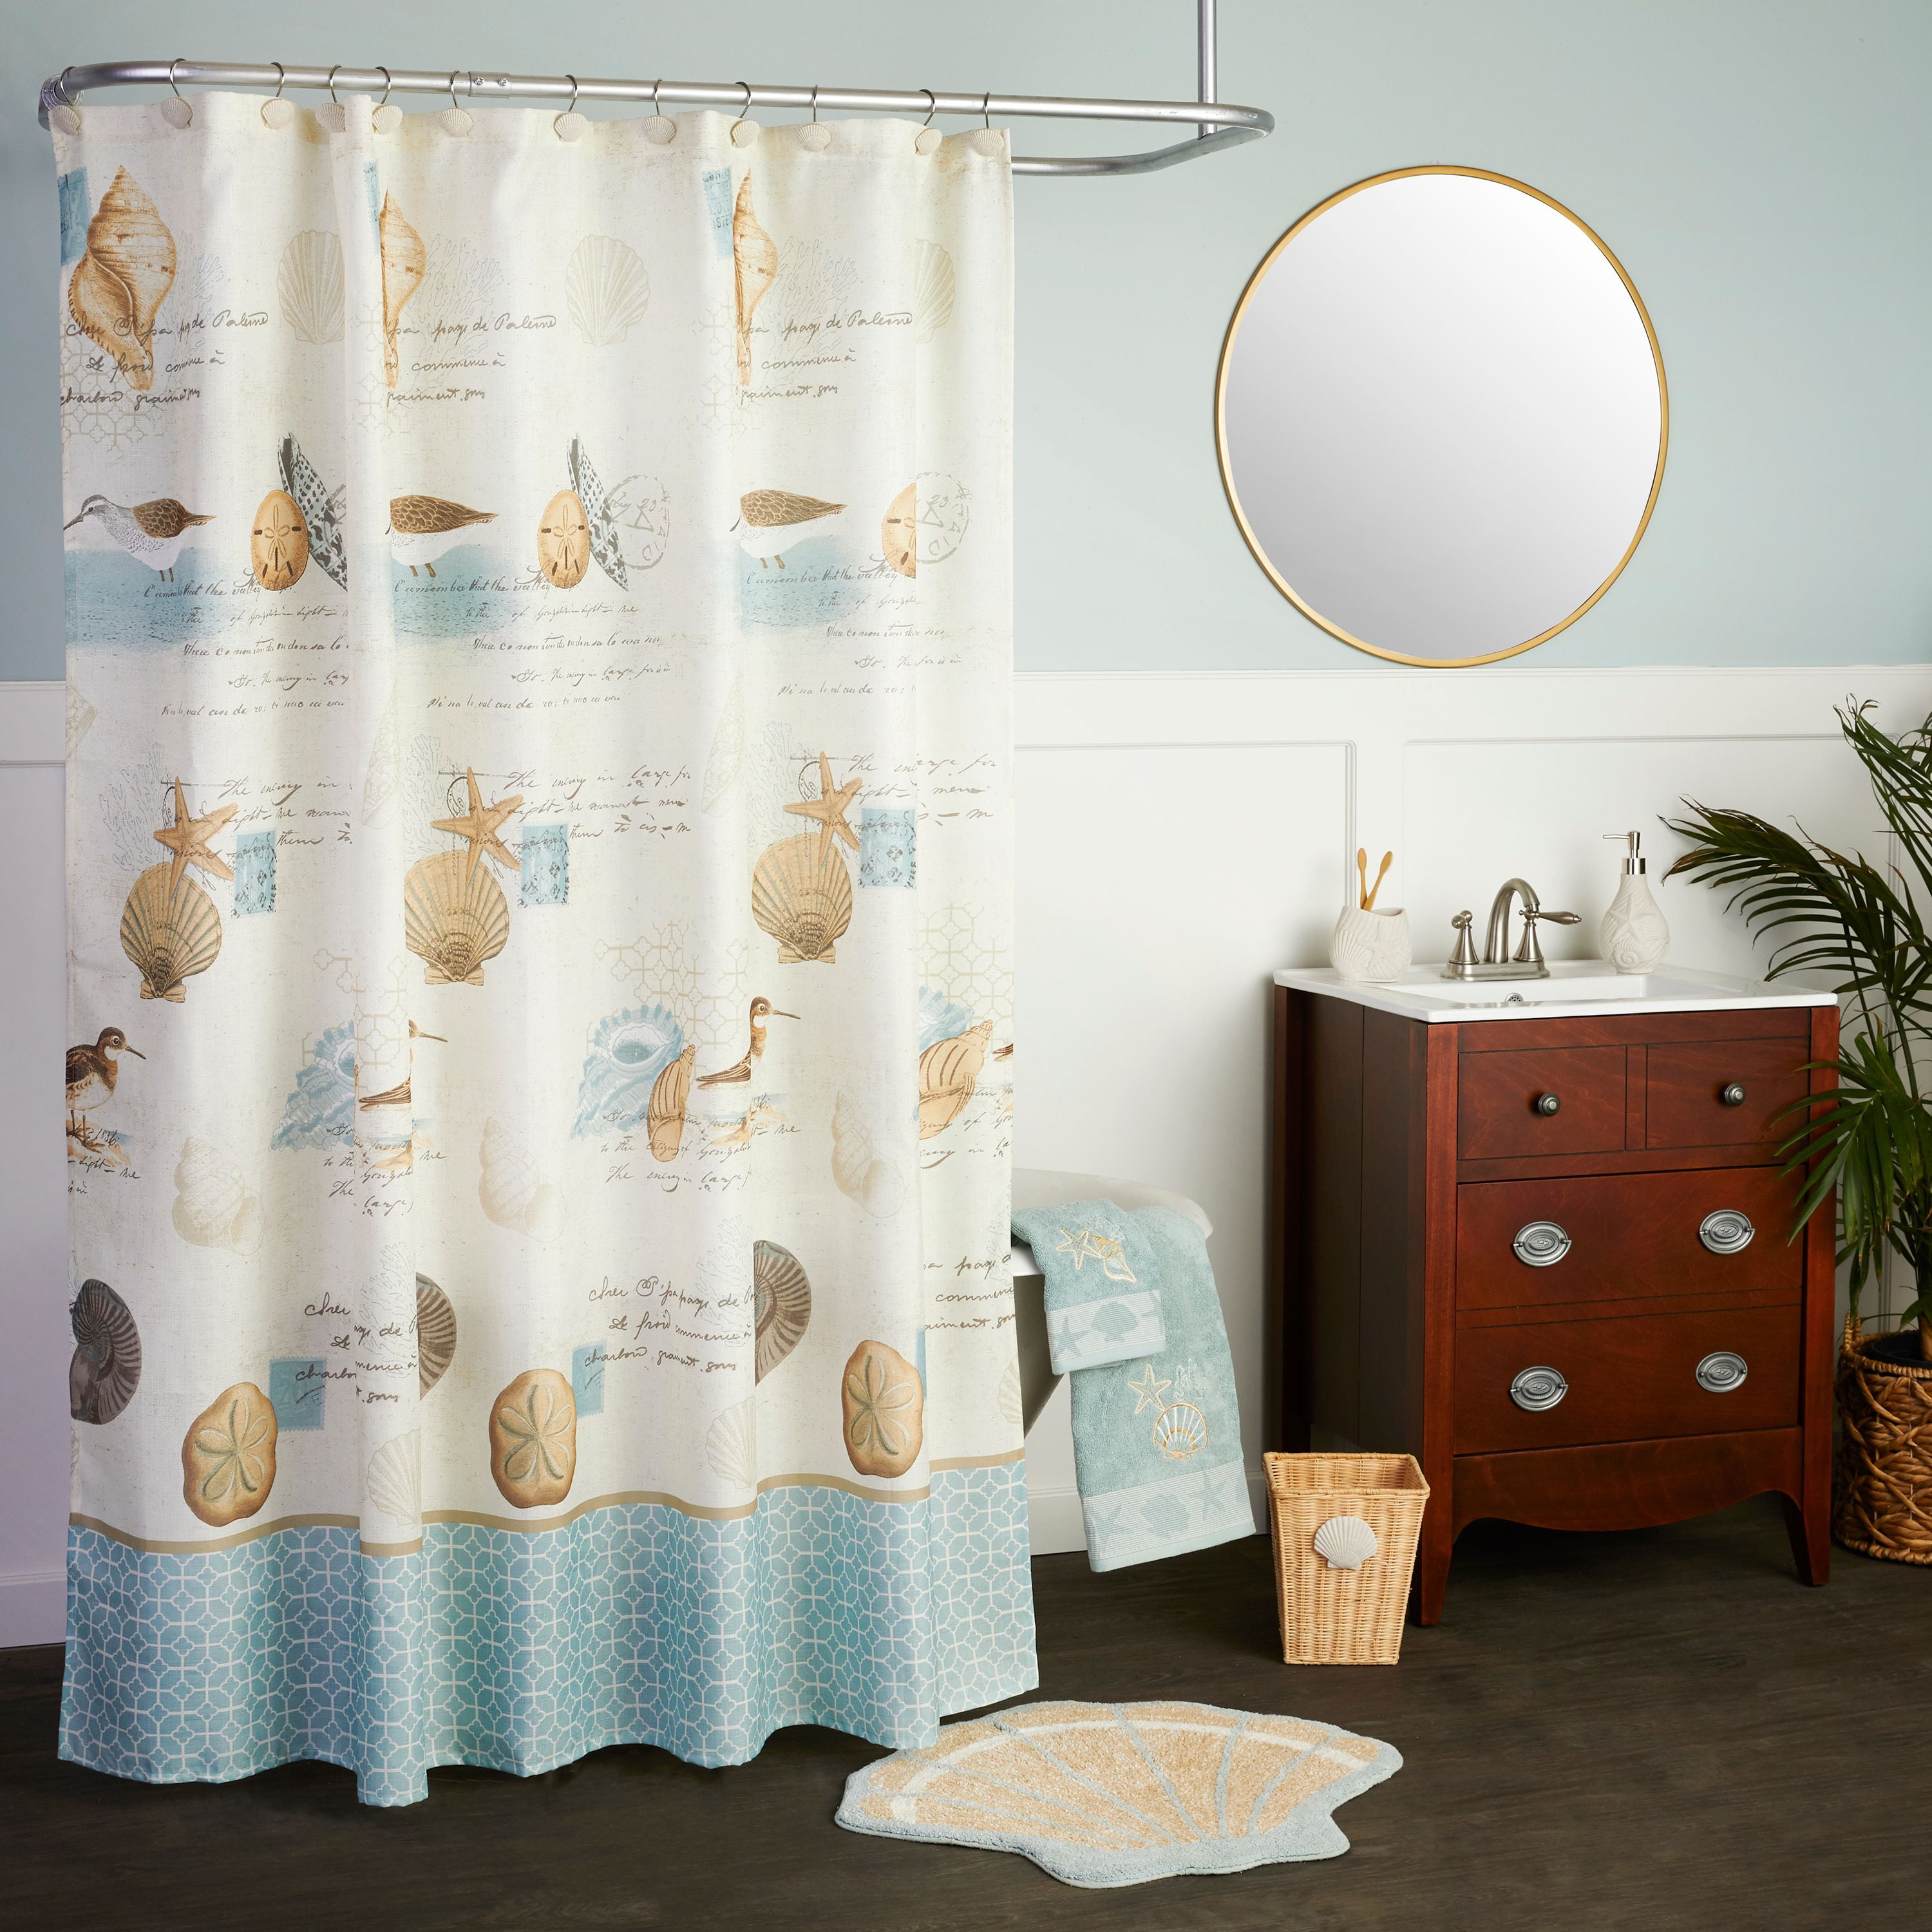 Details about   Sunny Beach Fabric Shower Curtains Sea Scenery Bath Screen Products with 12 Hook 